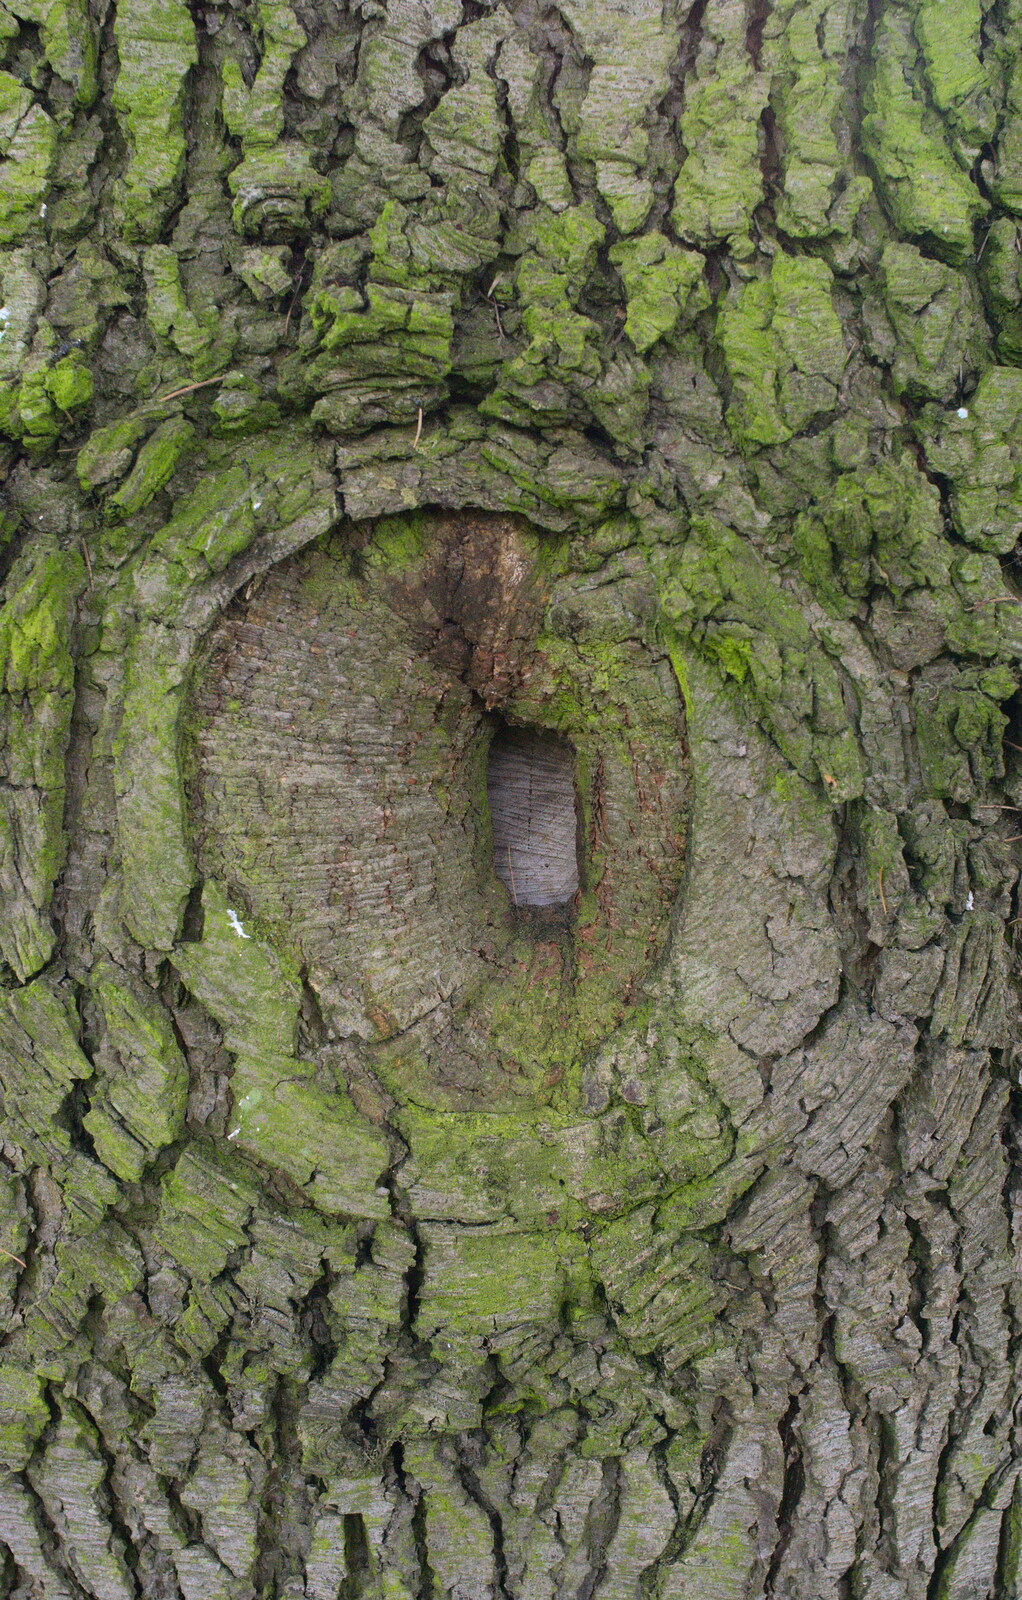 Funky hole in a tree from A Walk around Bressingham Winter Garden, Bressingham, Norfolk - 3rd March 2013